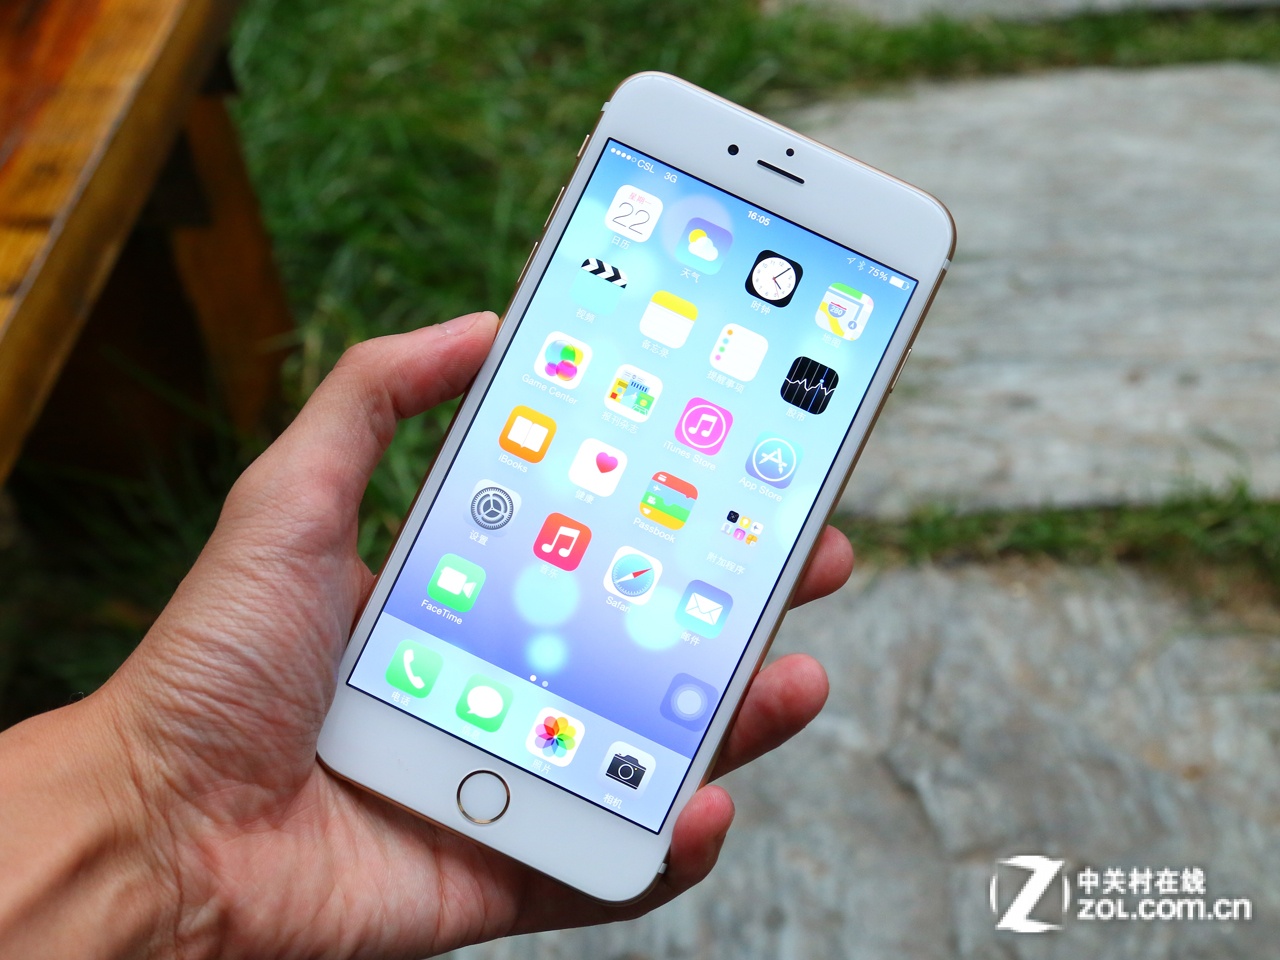 iPhone 6 Vs iPhone 6 Plus Review: Which To Buy?